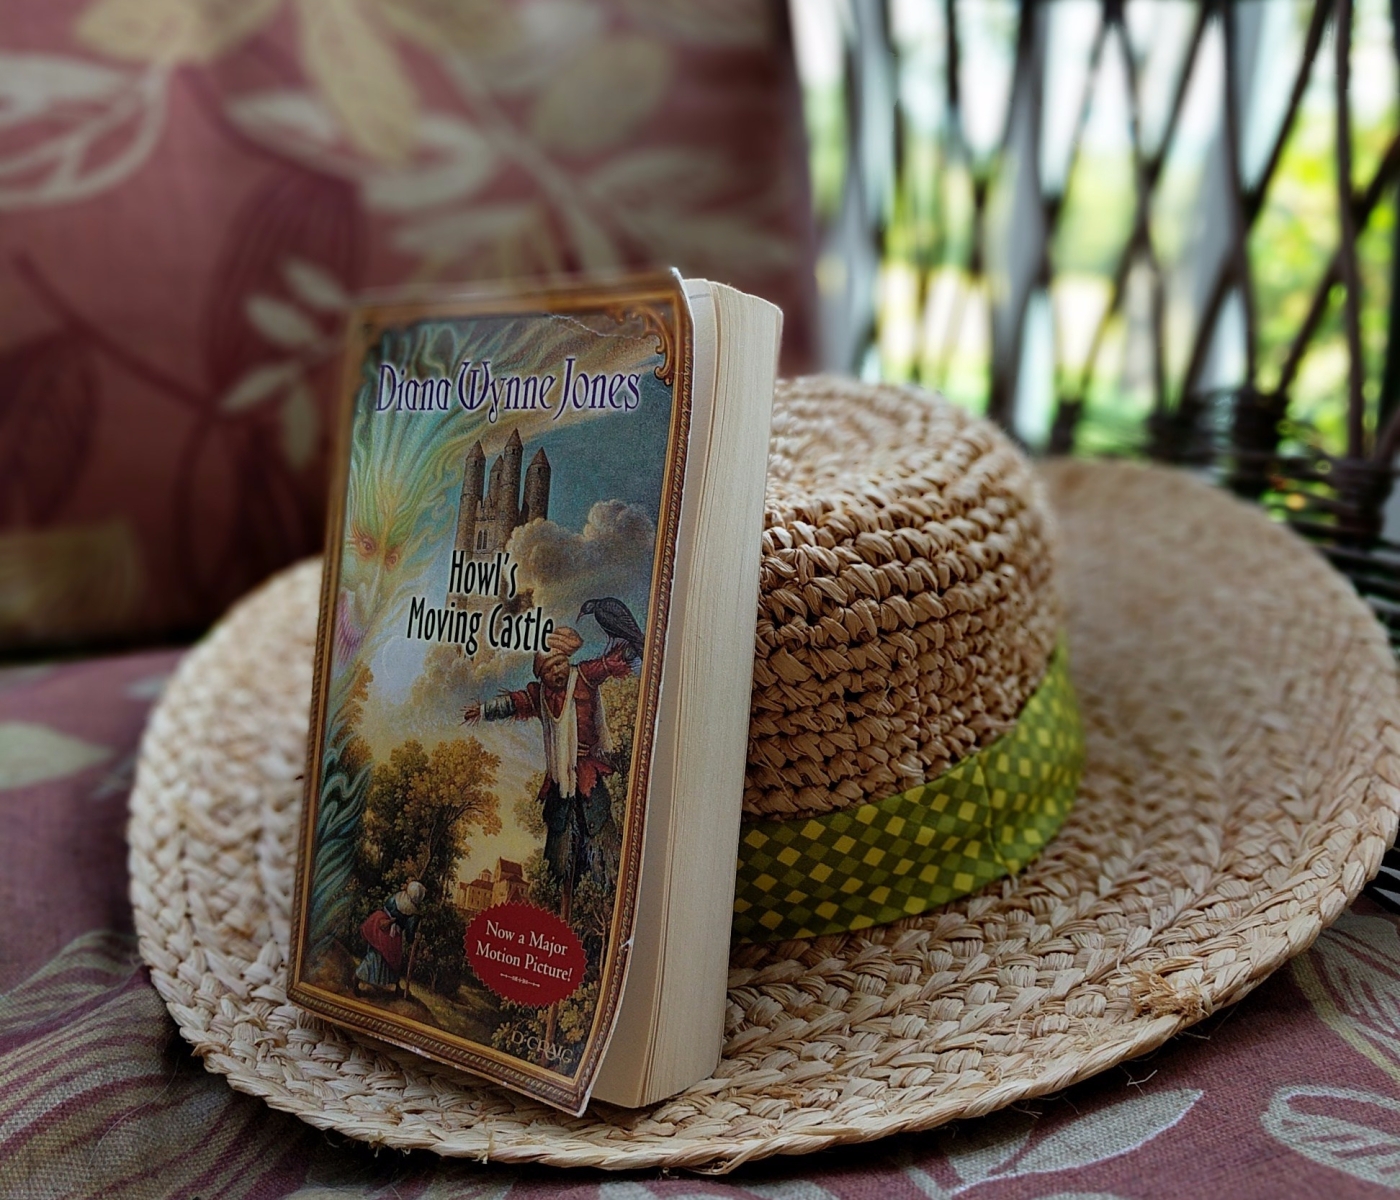 book review howl's moving castle